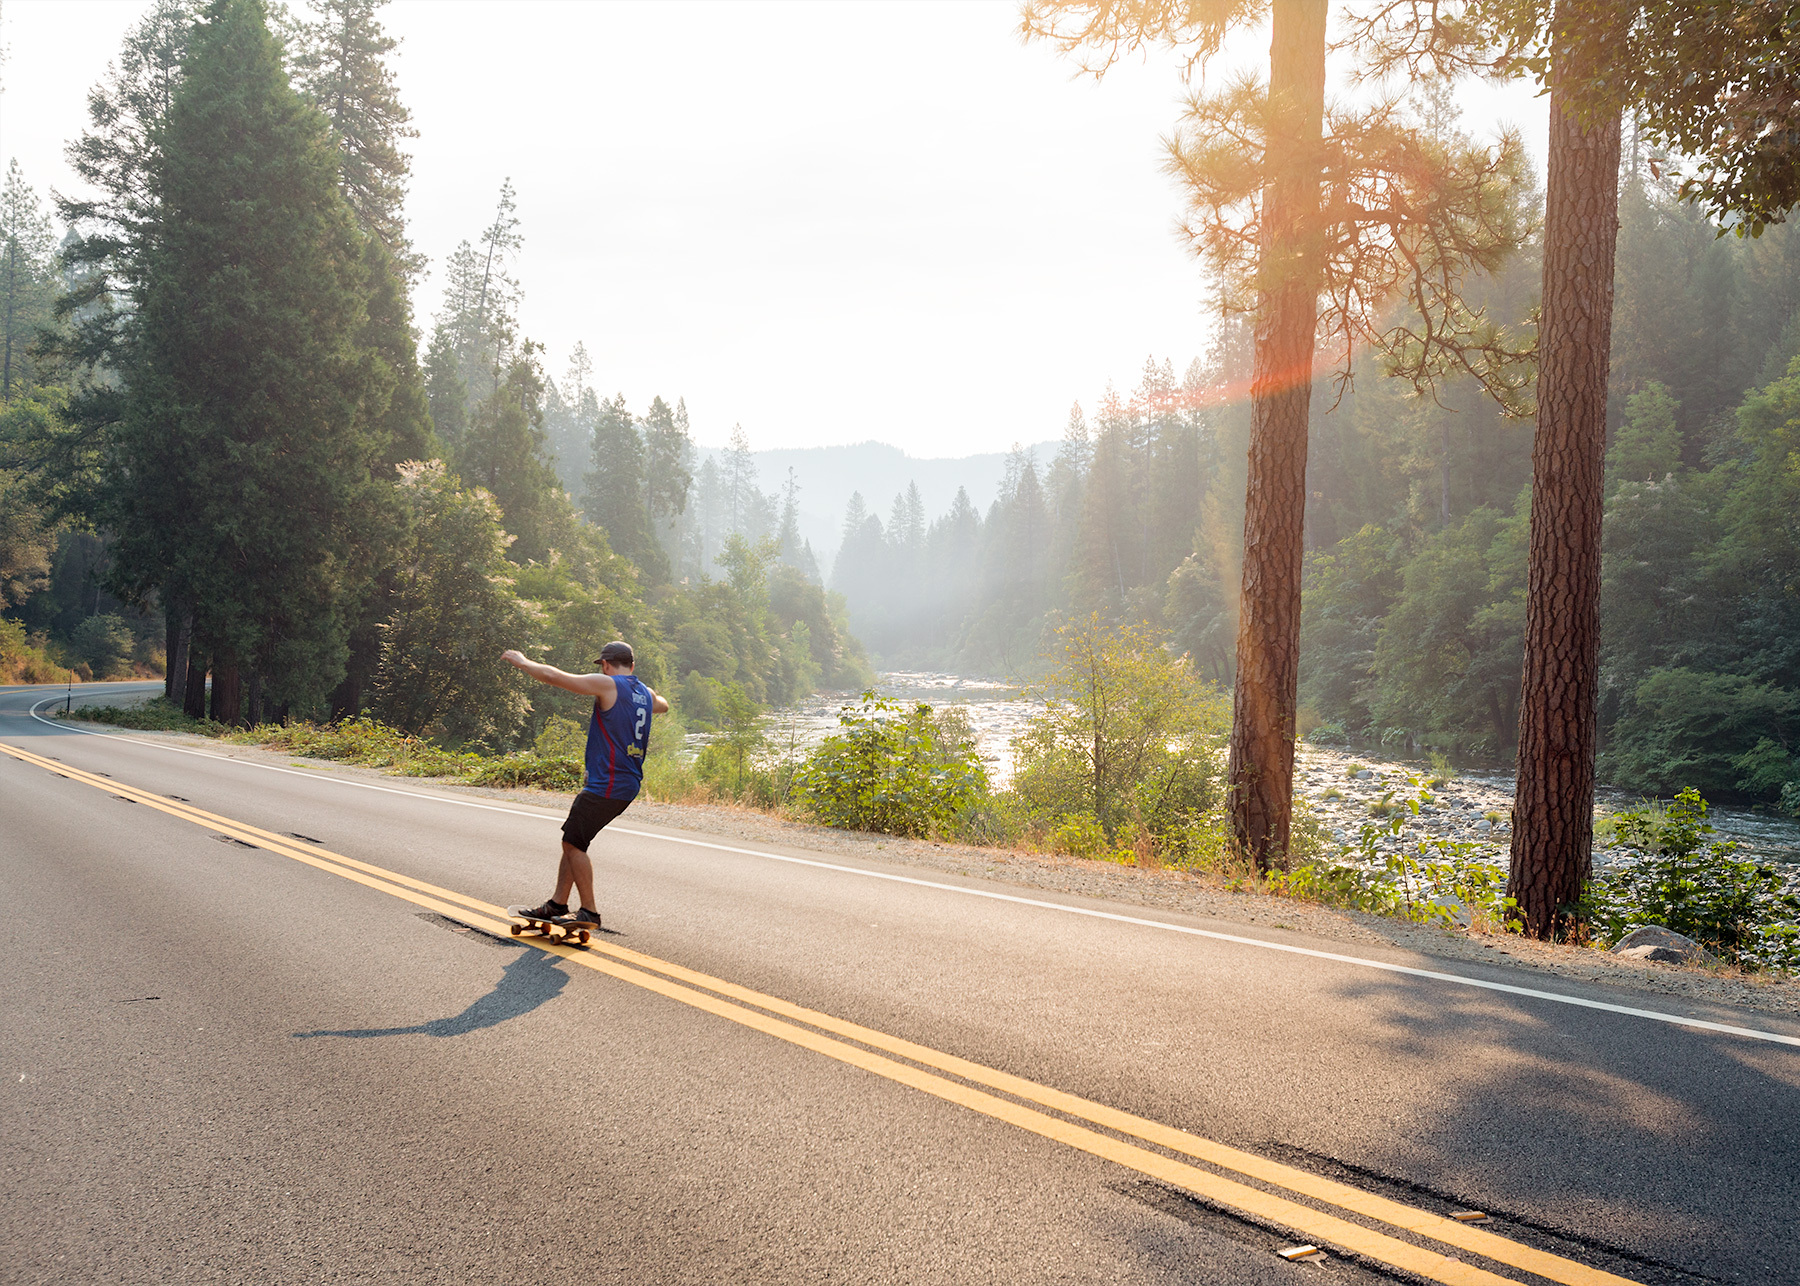 Matt skateboarding down a highway with trees and a river in the background in California